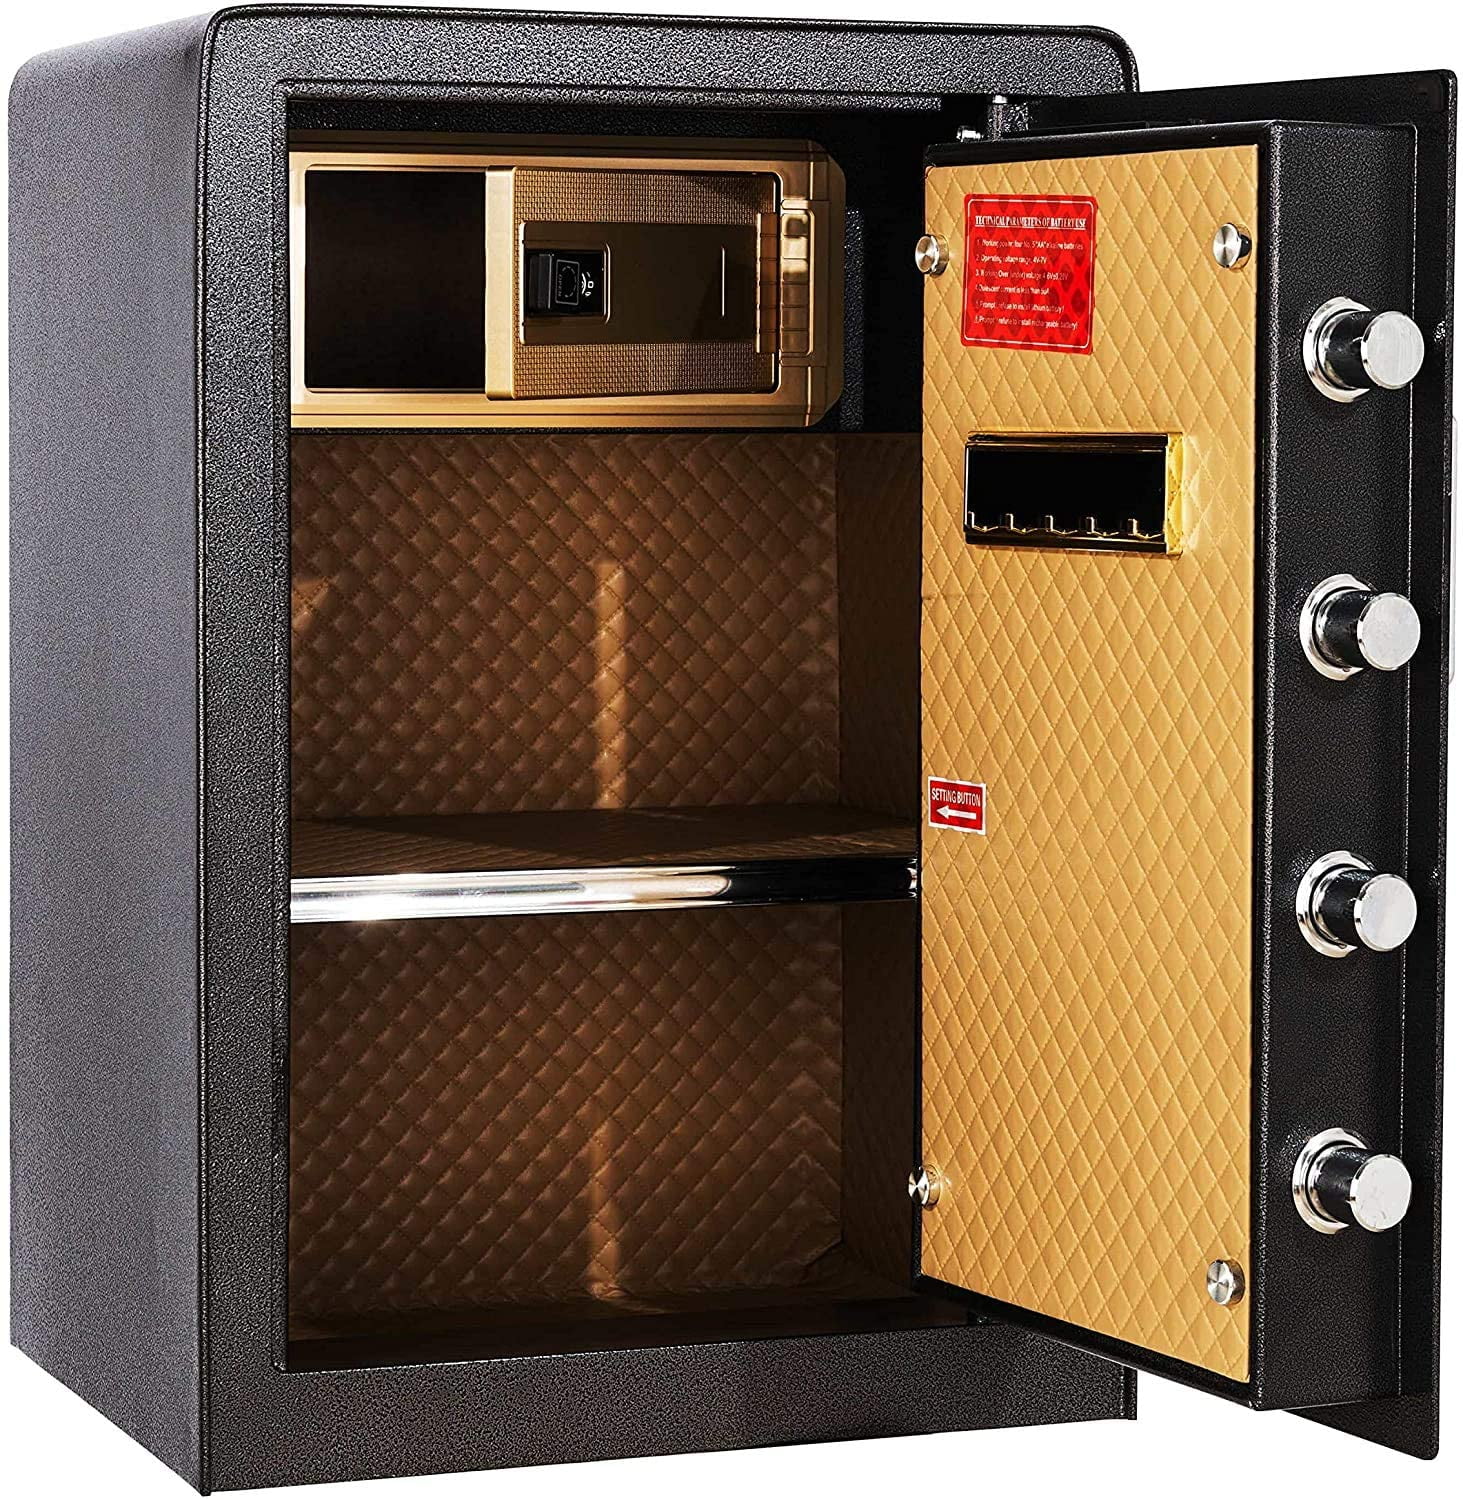 Large Electronic Digital Security Safe Box 2 Cubic Feet Cabinets Wall Safe Lock 